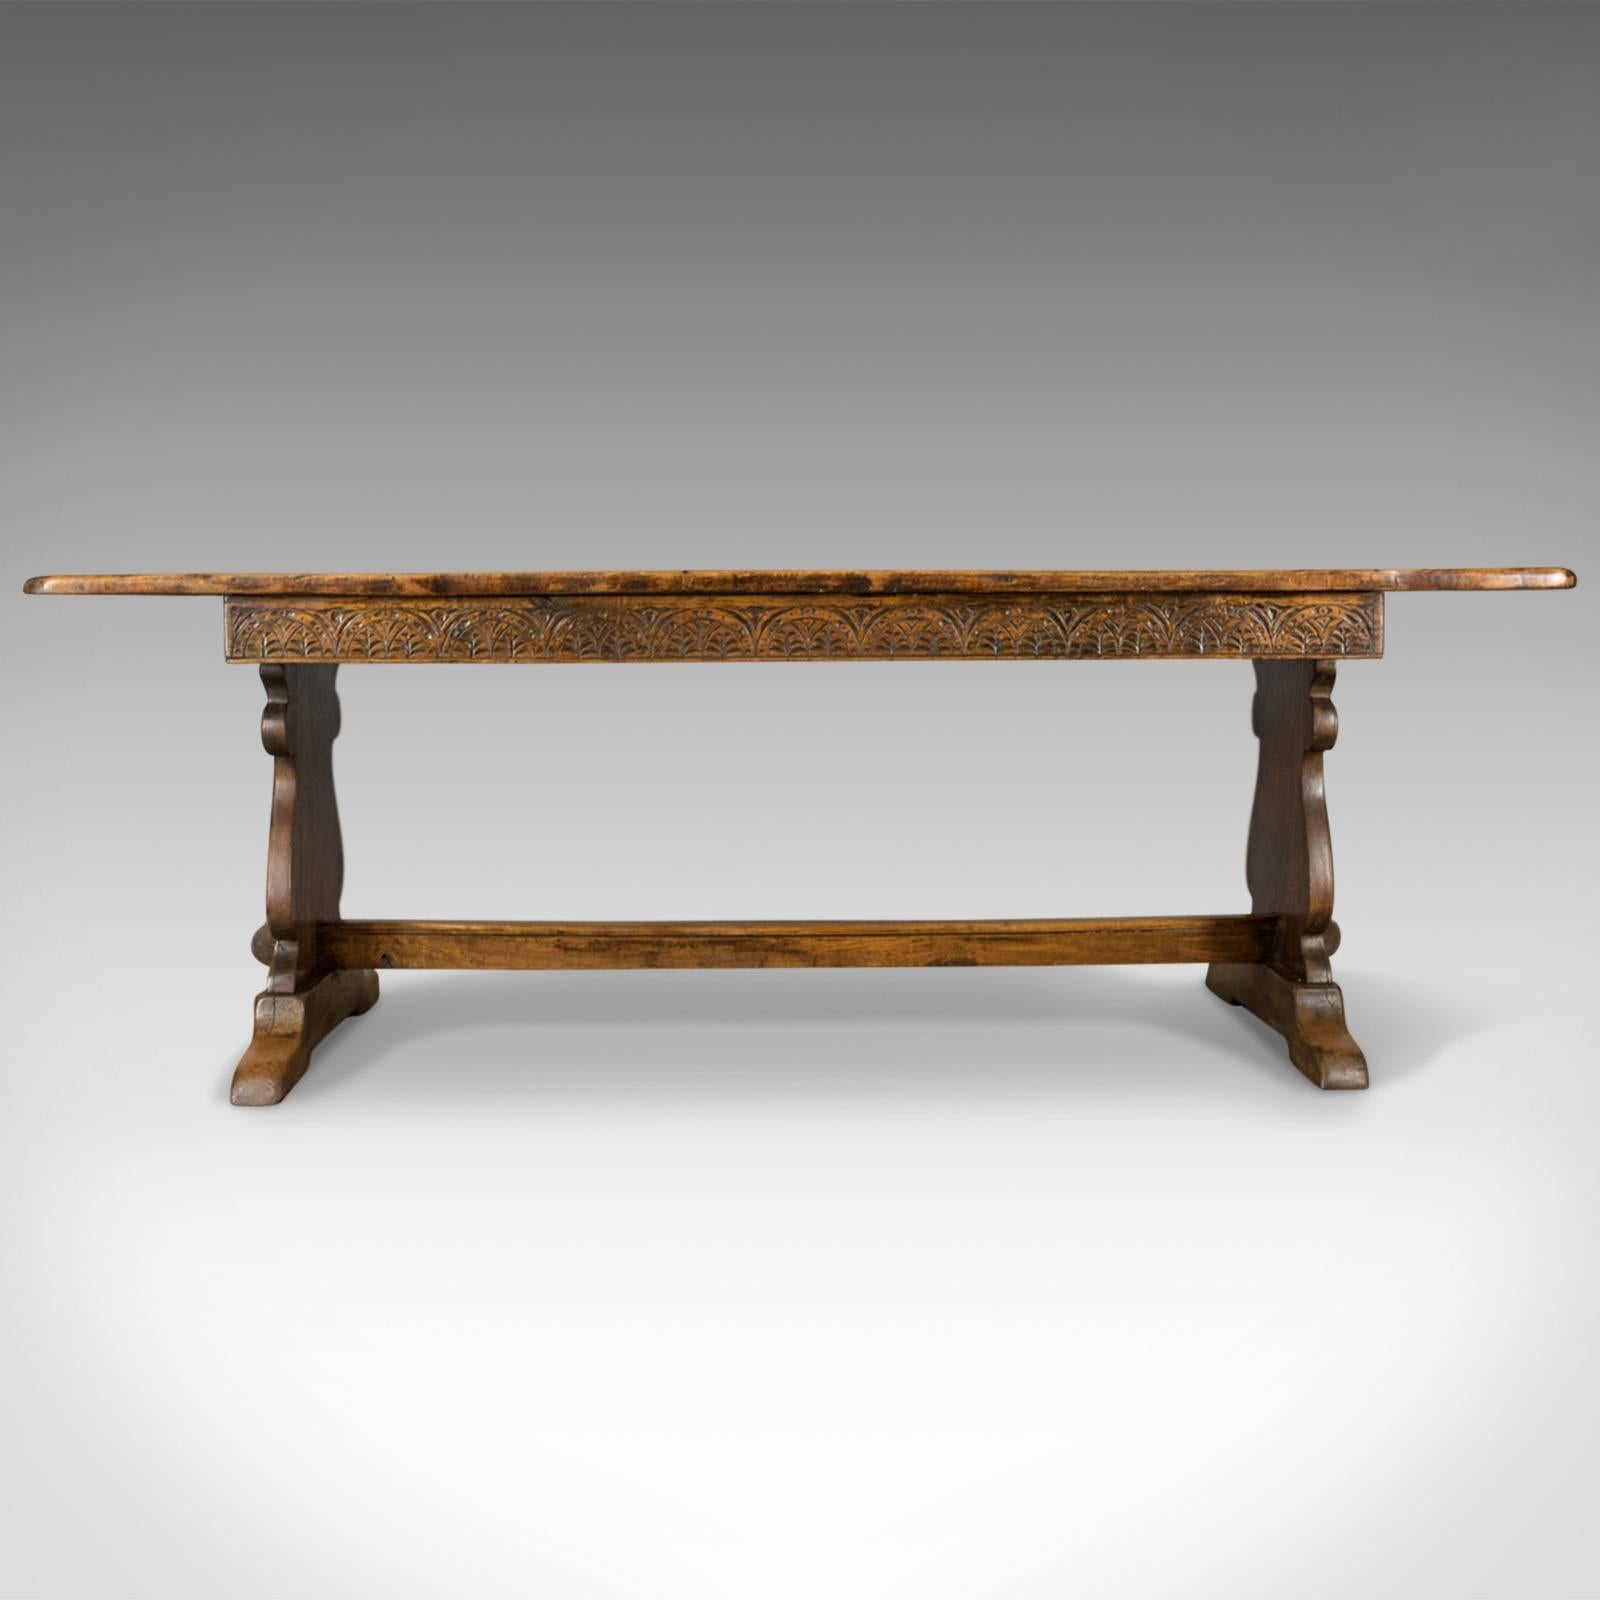 This is an antique refectory table, a Victorian oak dining table in the Jacobean taste and seating up to ten, circa 1900 and later.

Attractive honey tones to the English oak
Grain interest and a desirable aged patina
Victorian and later in the